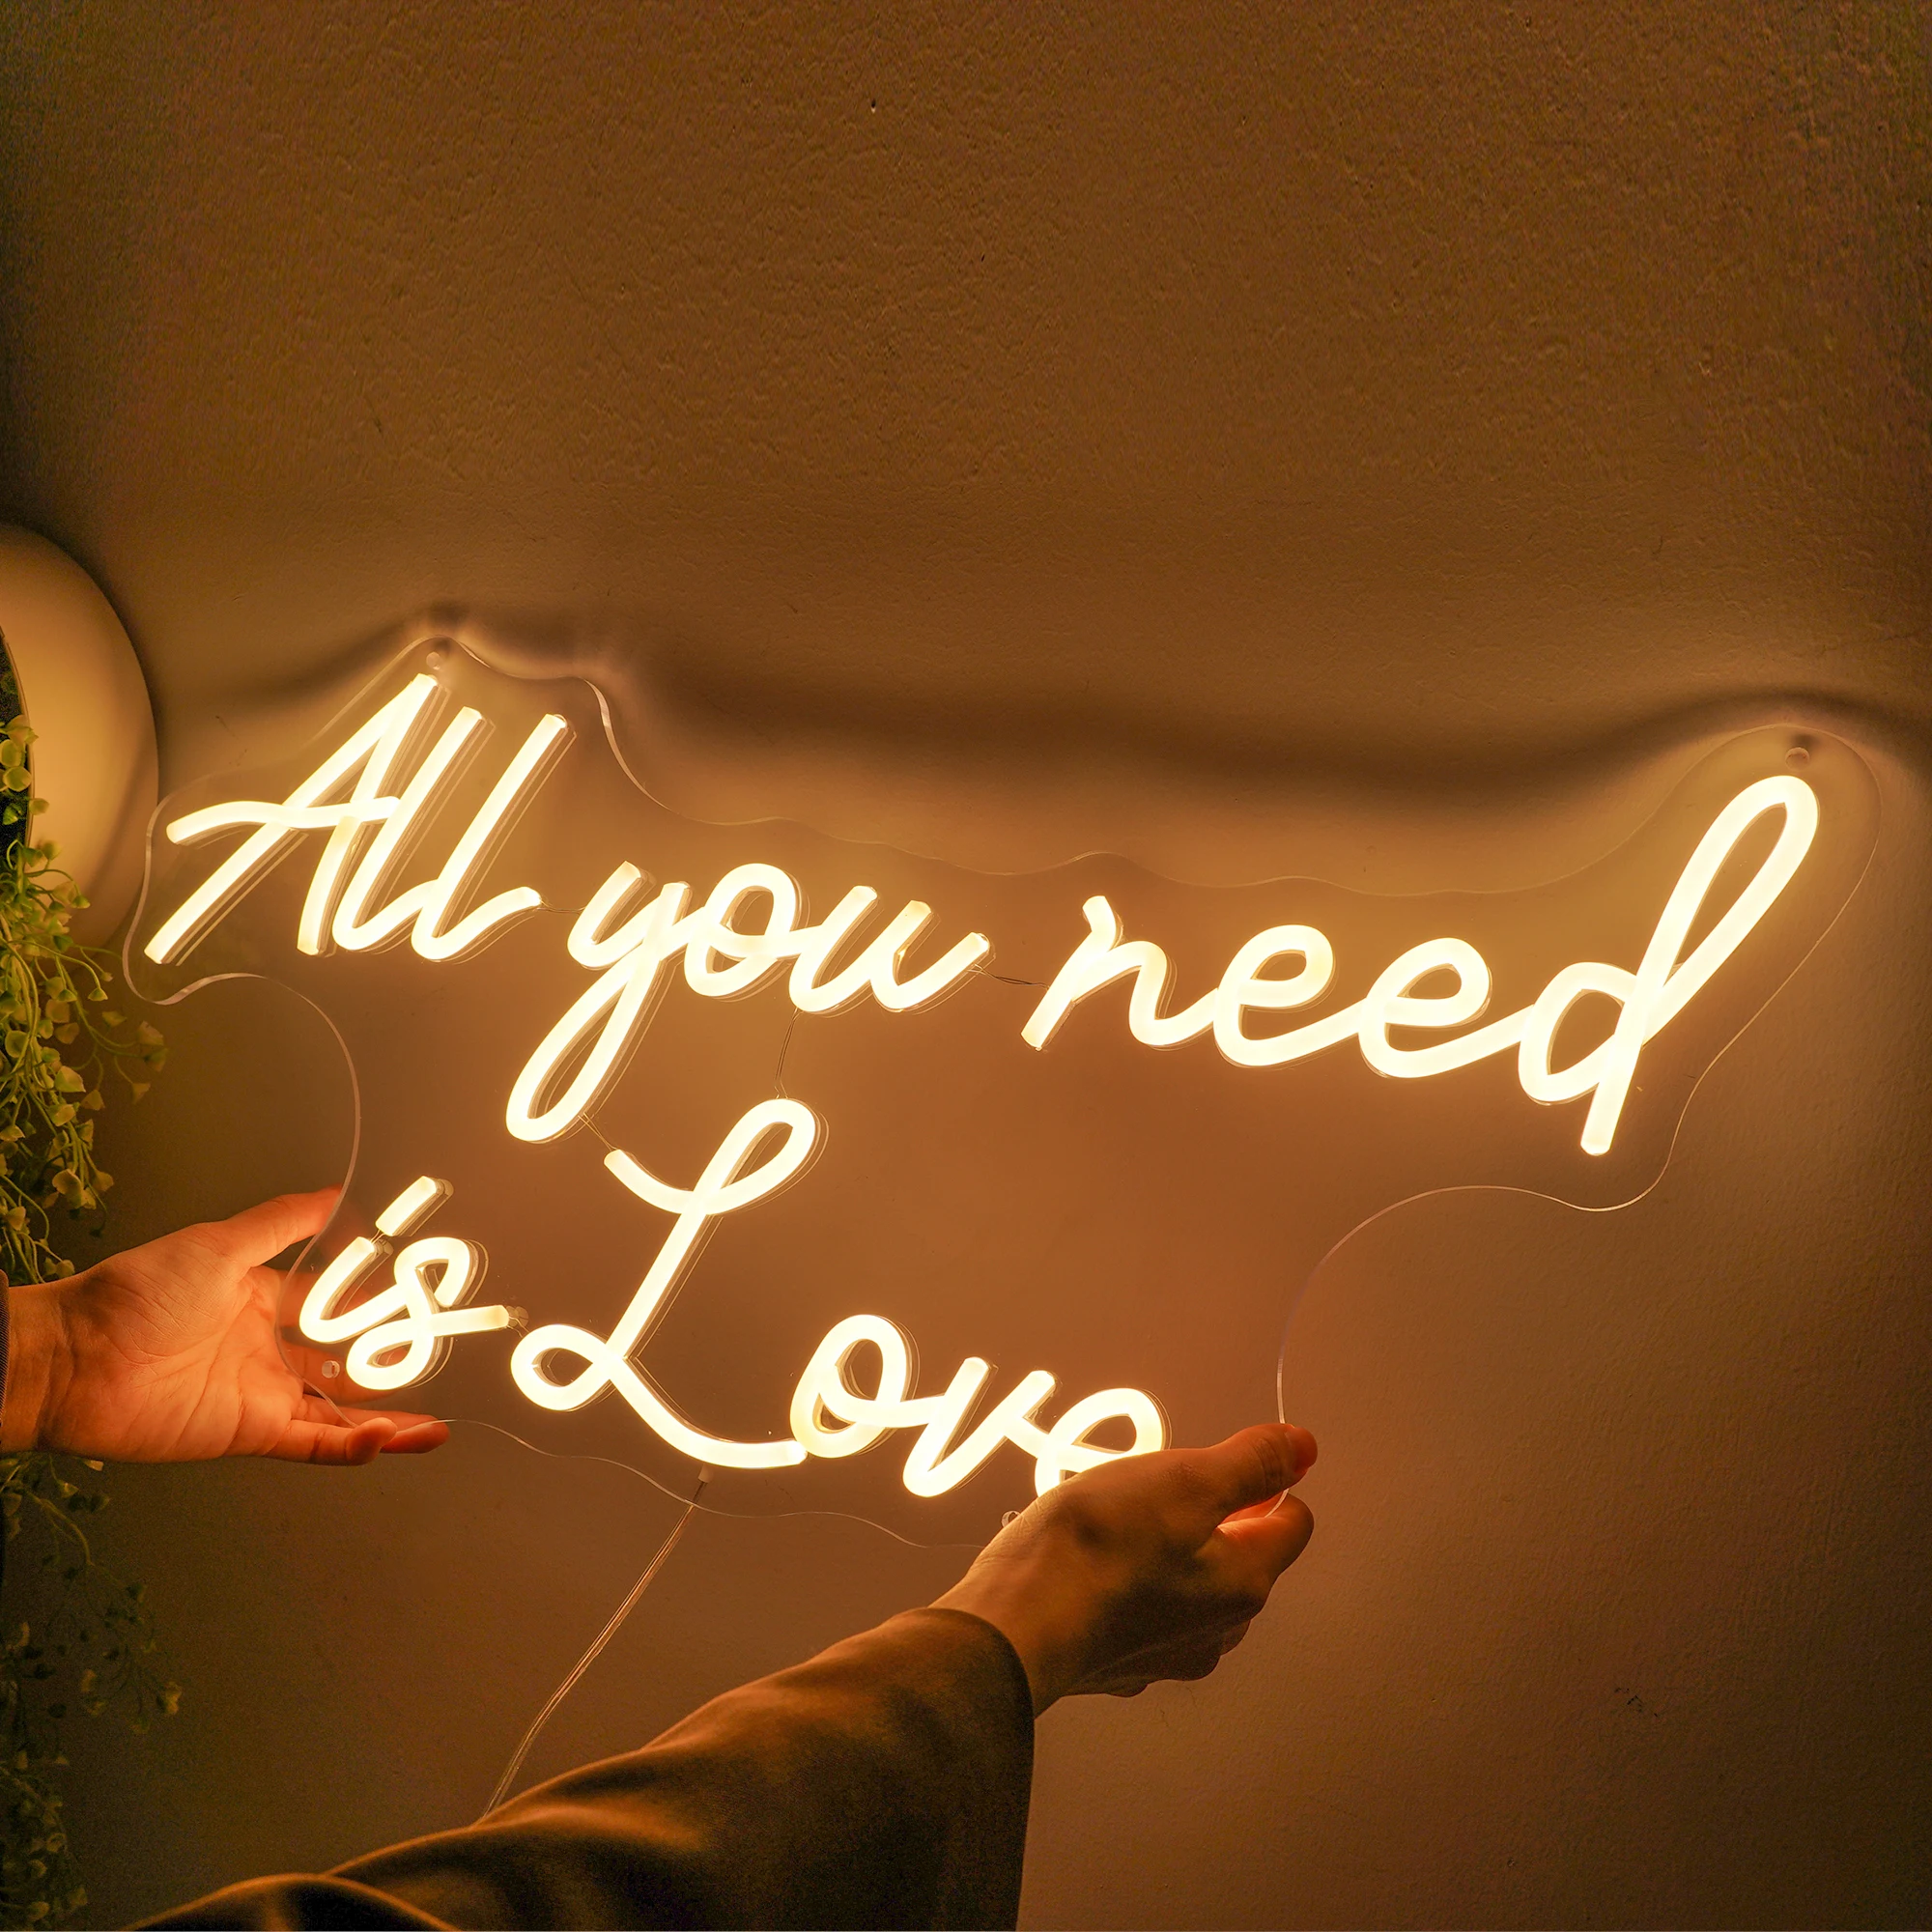 

All you need is love Custom Neon Sign Decor Bedroom Room Wall Valentine's Day Personalized Gift Engagement Wedding Decoration